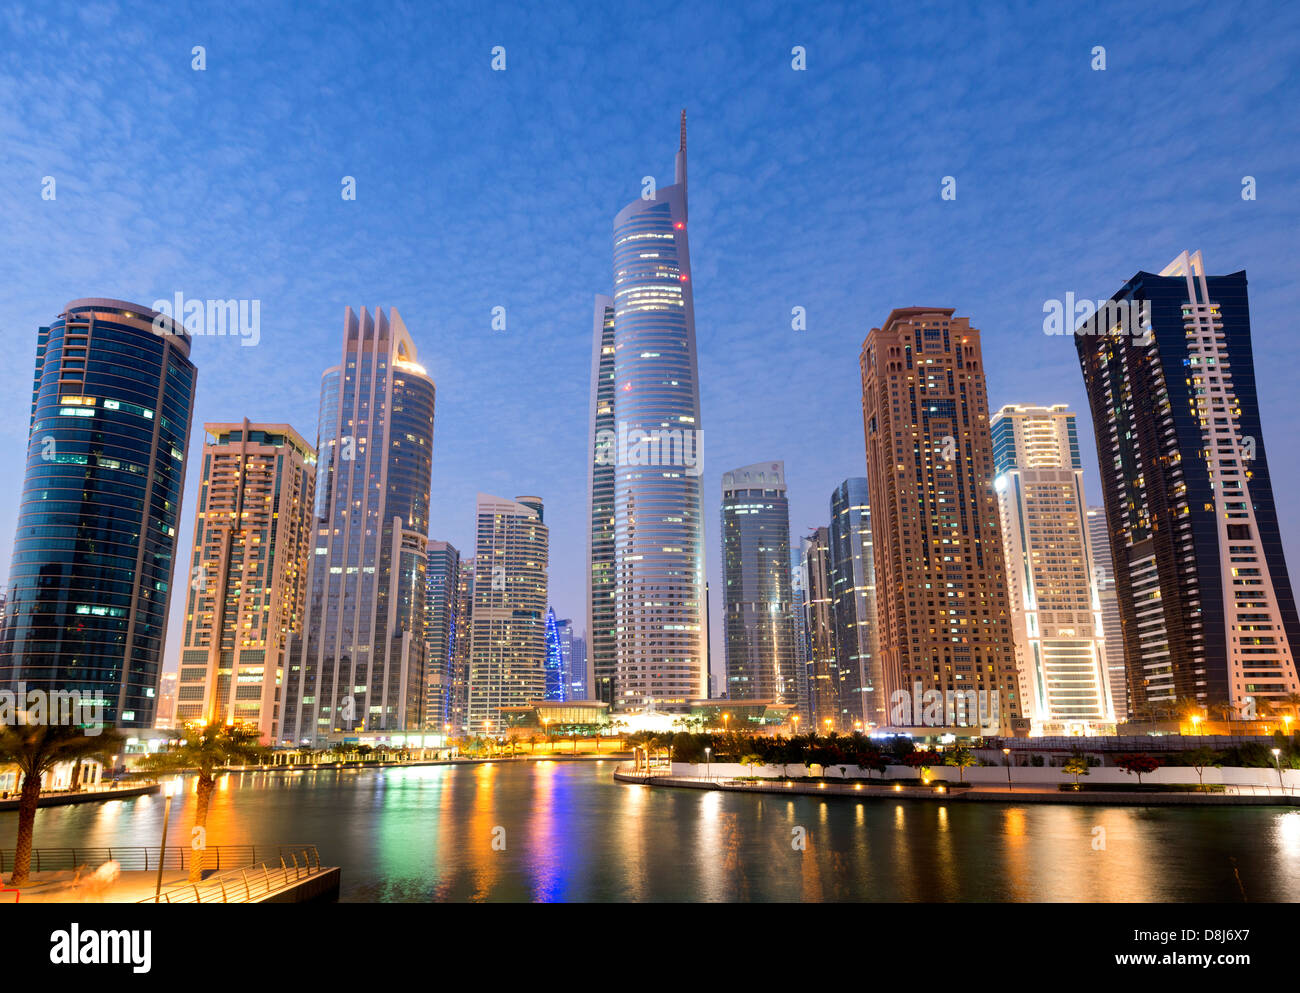 Night view of residential skyscrapers in Jumeirah Lakes Towers (JLT) new development  in Dubai United Arab Emirates Stock Photo